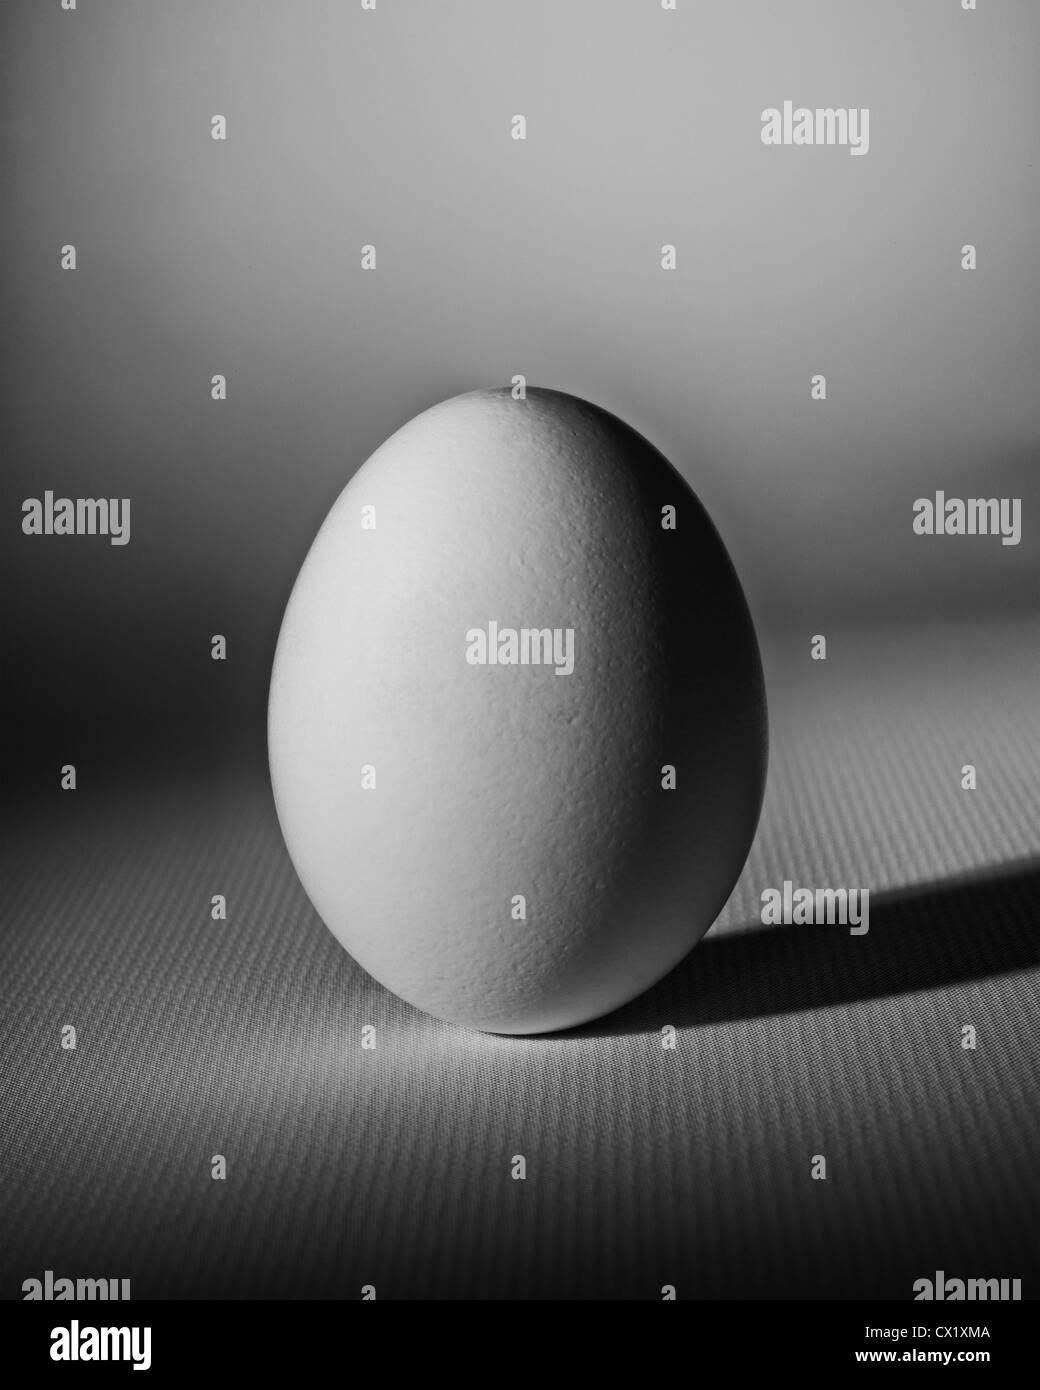 Simplicity - a white egg photographs on a white textured surface. Stock Photo